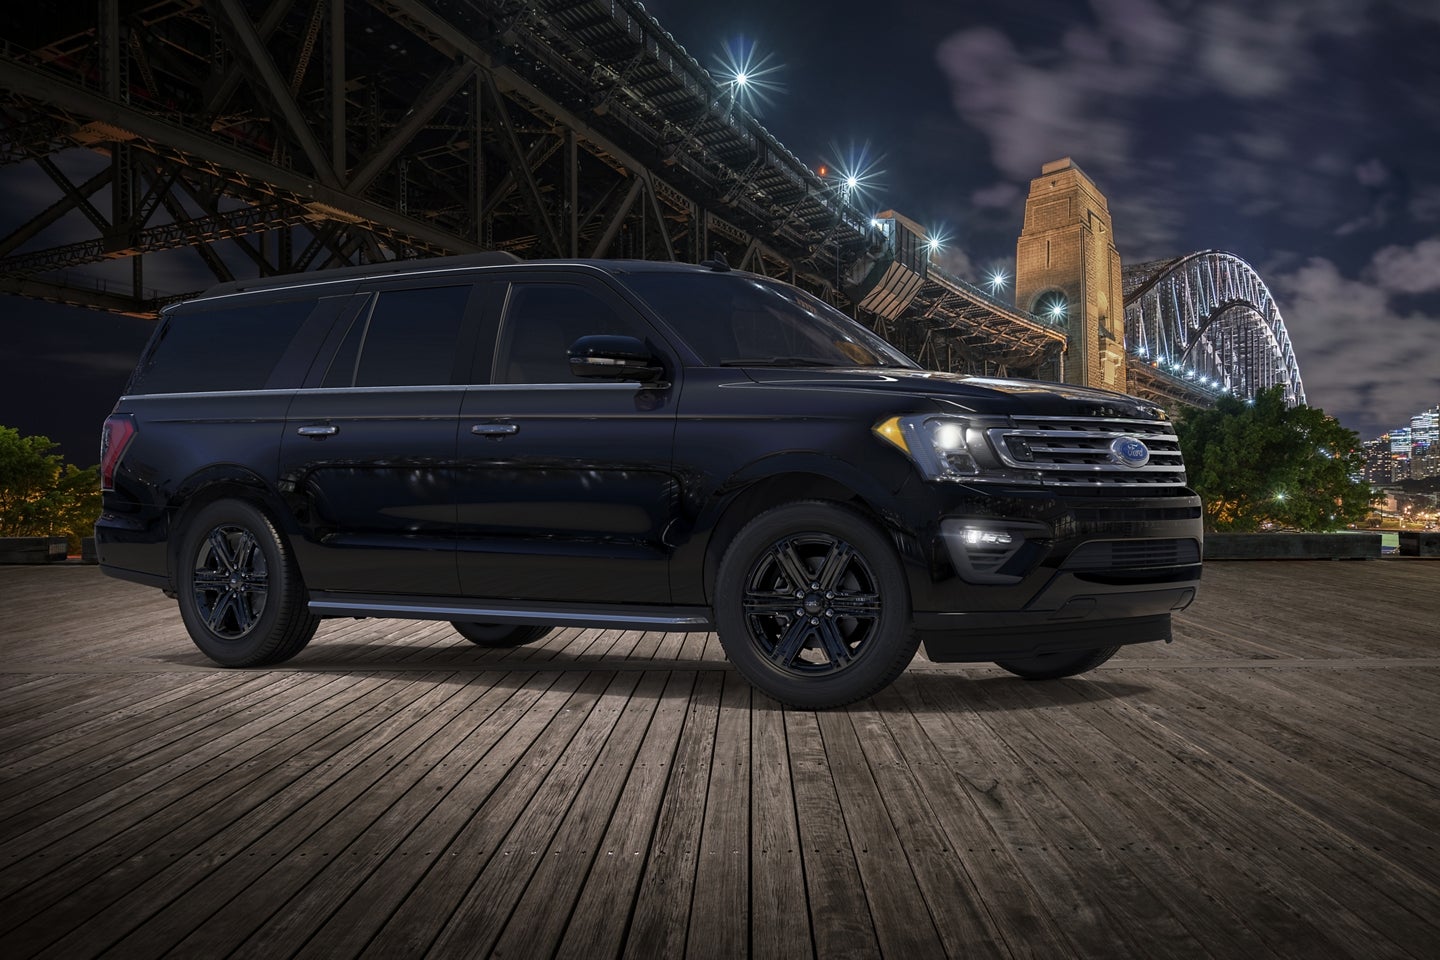 2020 Ford Expedition for Sale near Dothan, AL